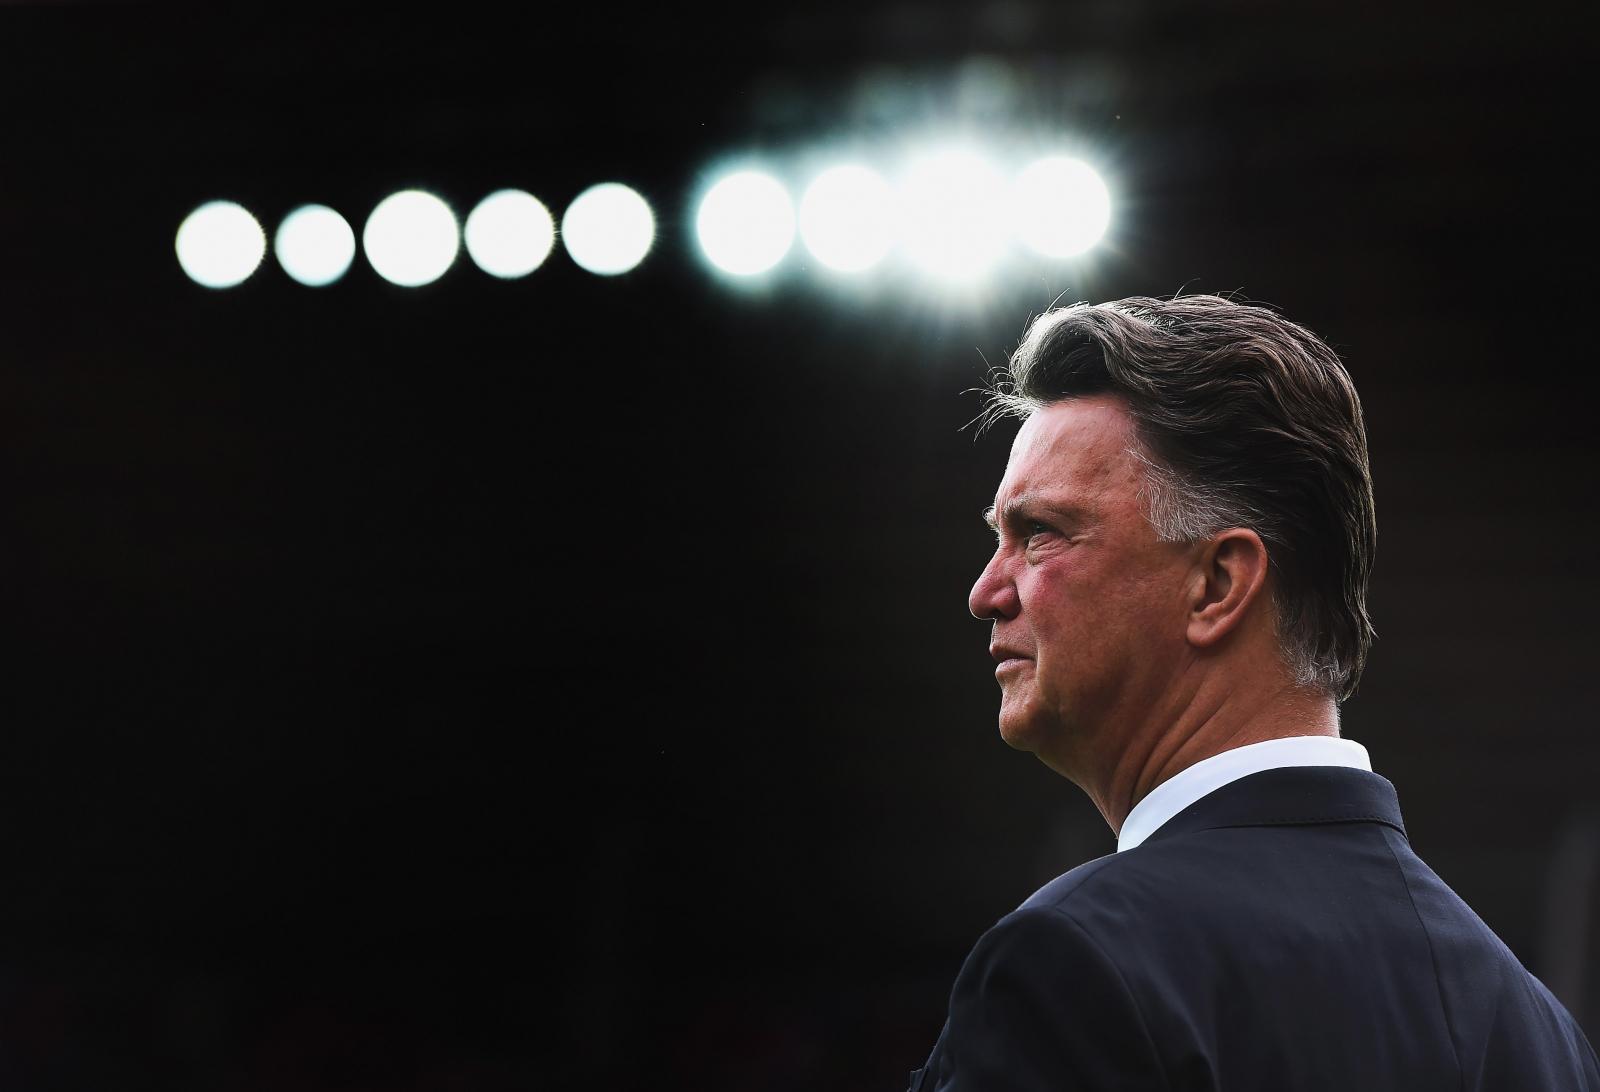 Happy 64th birthday to Louis van Gaal. Lets give the manager a win vs Tottenham for his birthday! 